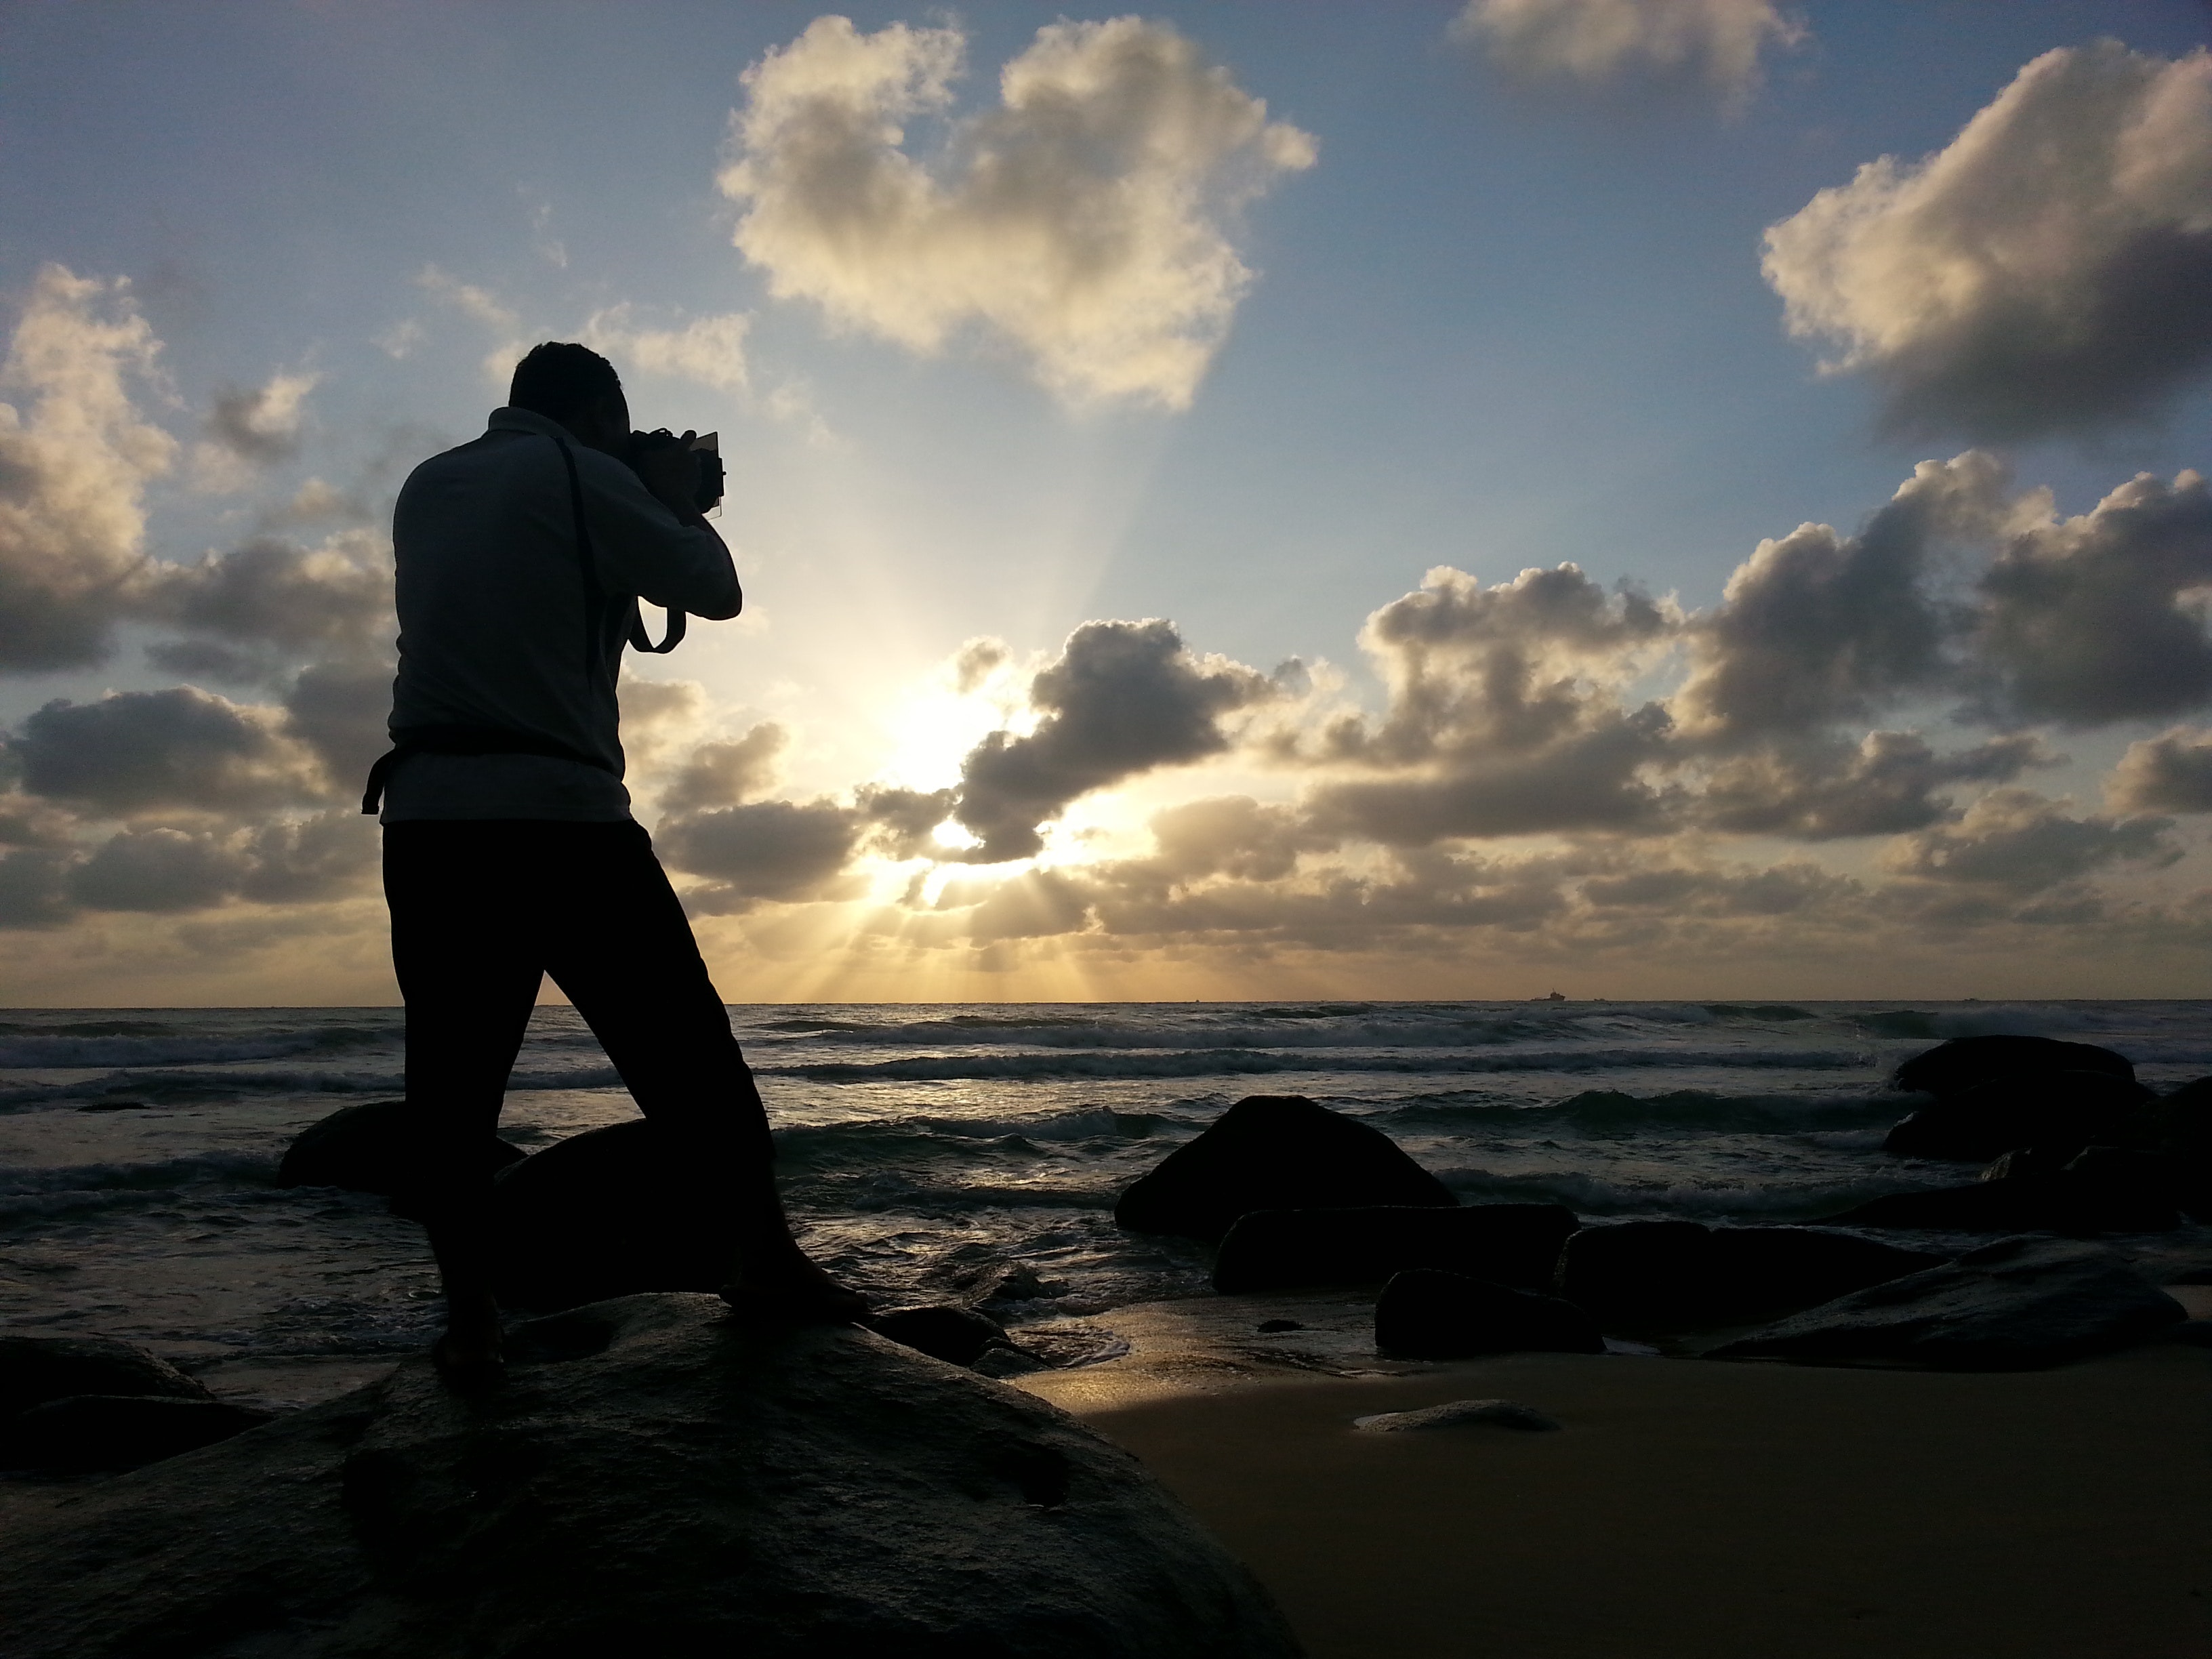 Person capturing photo near sea under clear blue and white cloudy sky during daytime